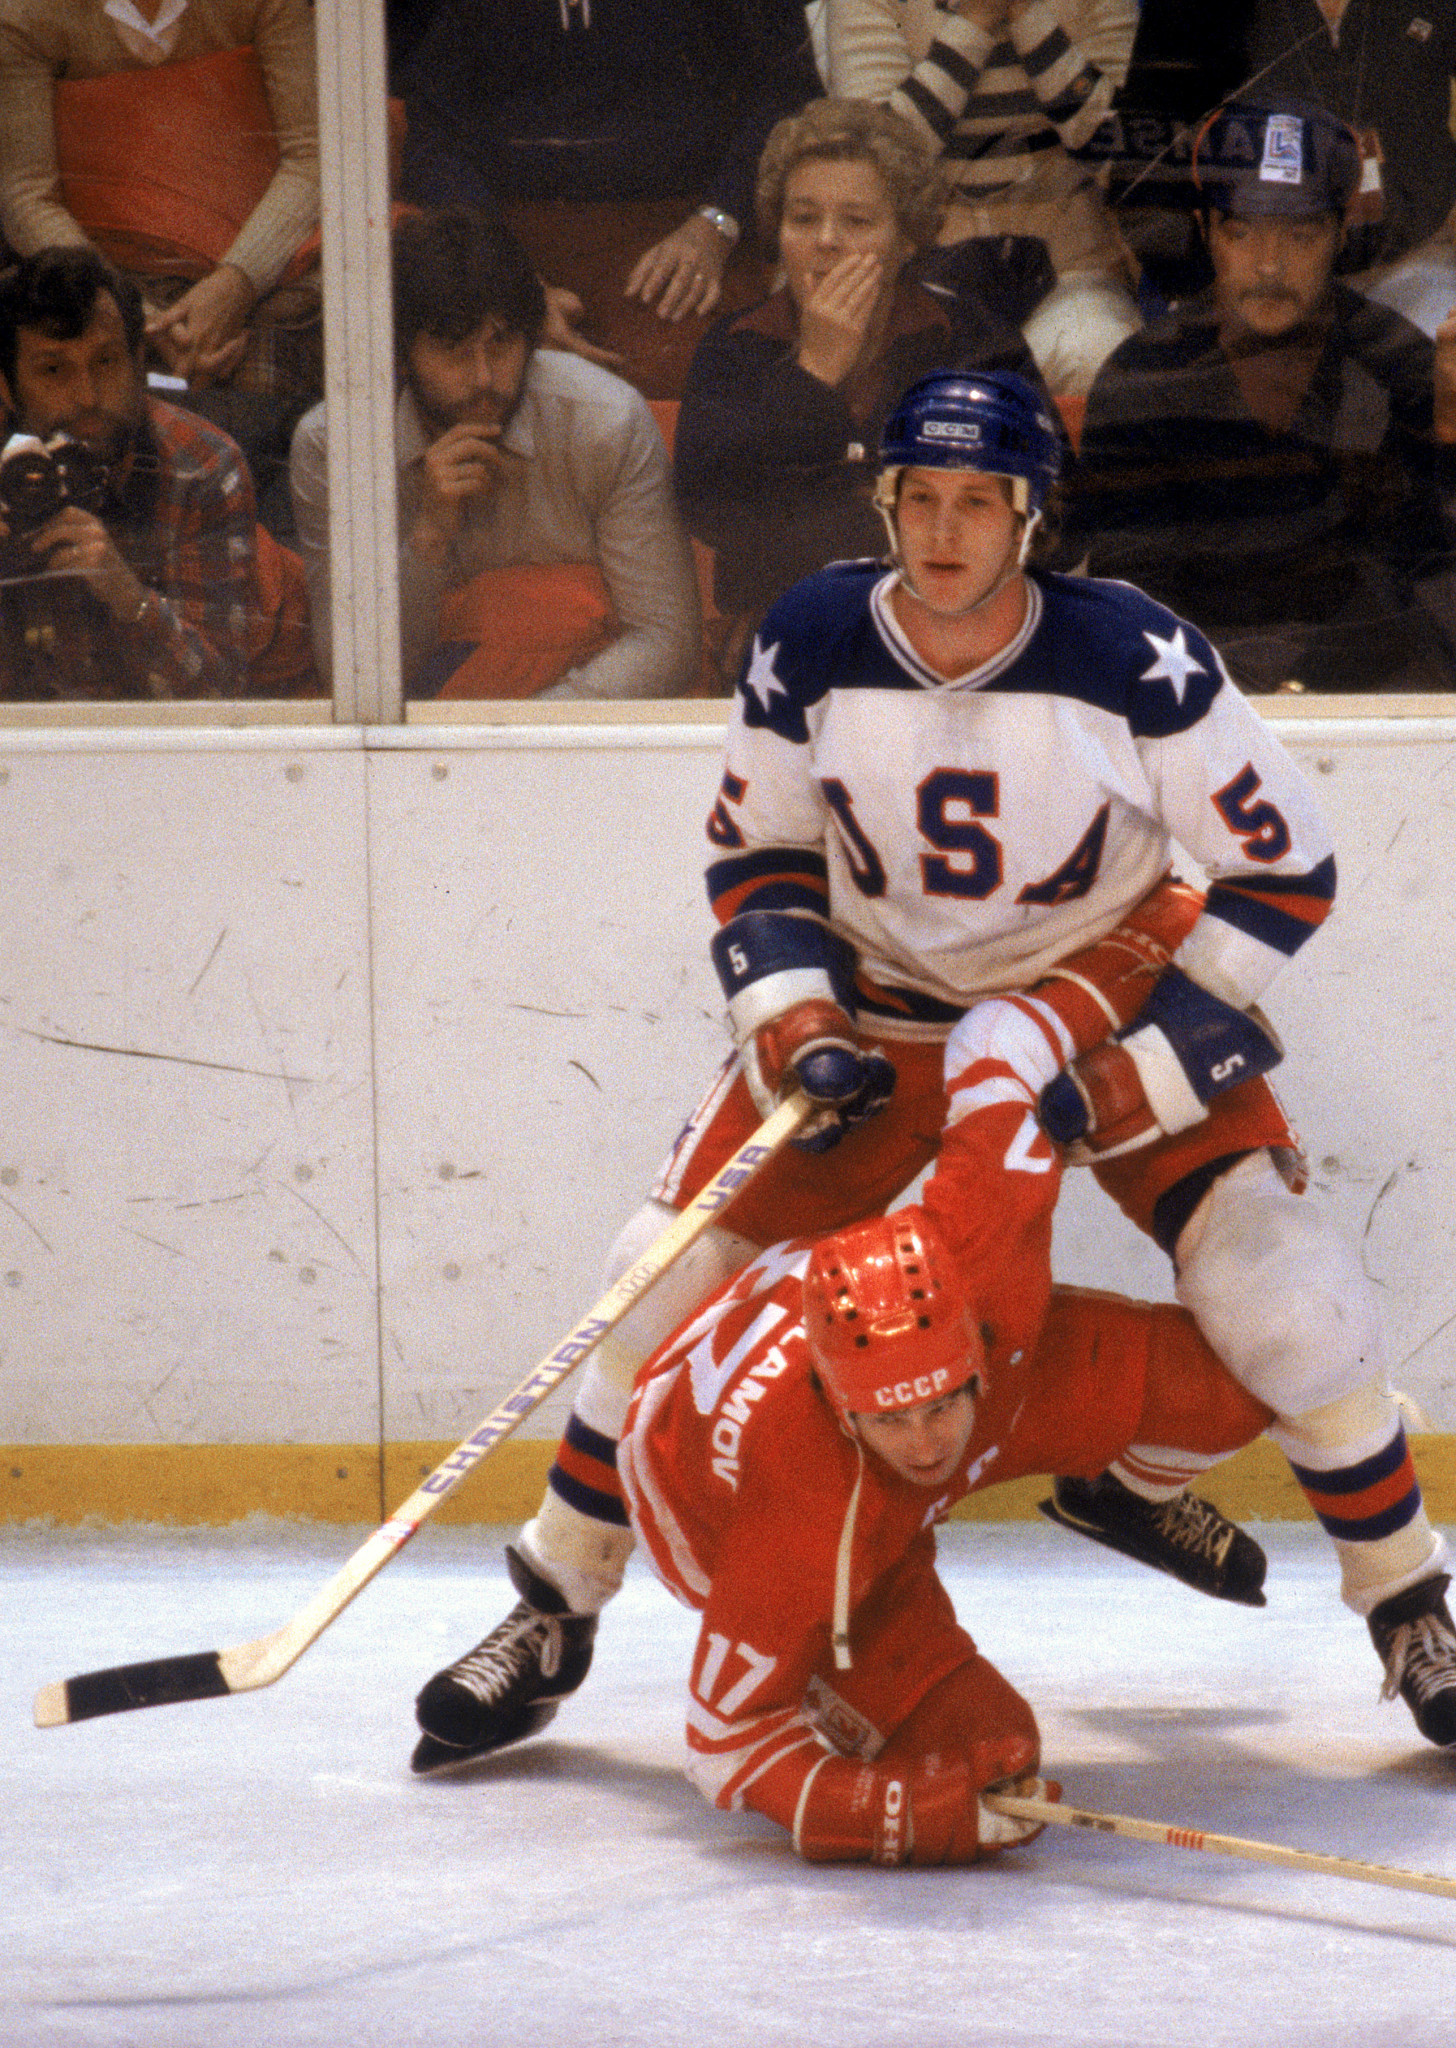 Mike Ramsey of the US and Valeri Kharlamov of the Soviet Union pictured during the home side's historic 4-3 win in the first medal-round match at the 1980 Lake Placid Winter Olympics ©Getty Images